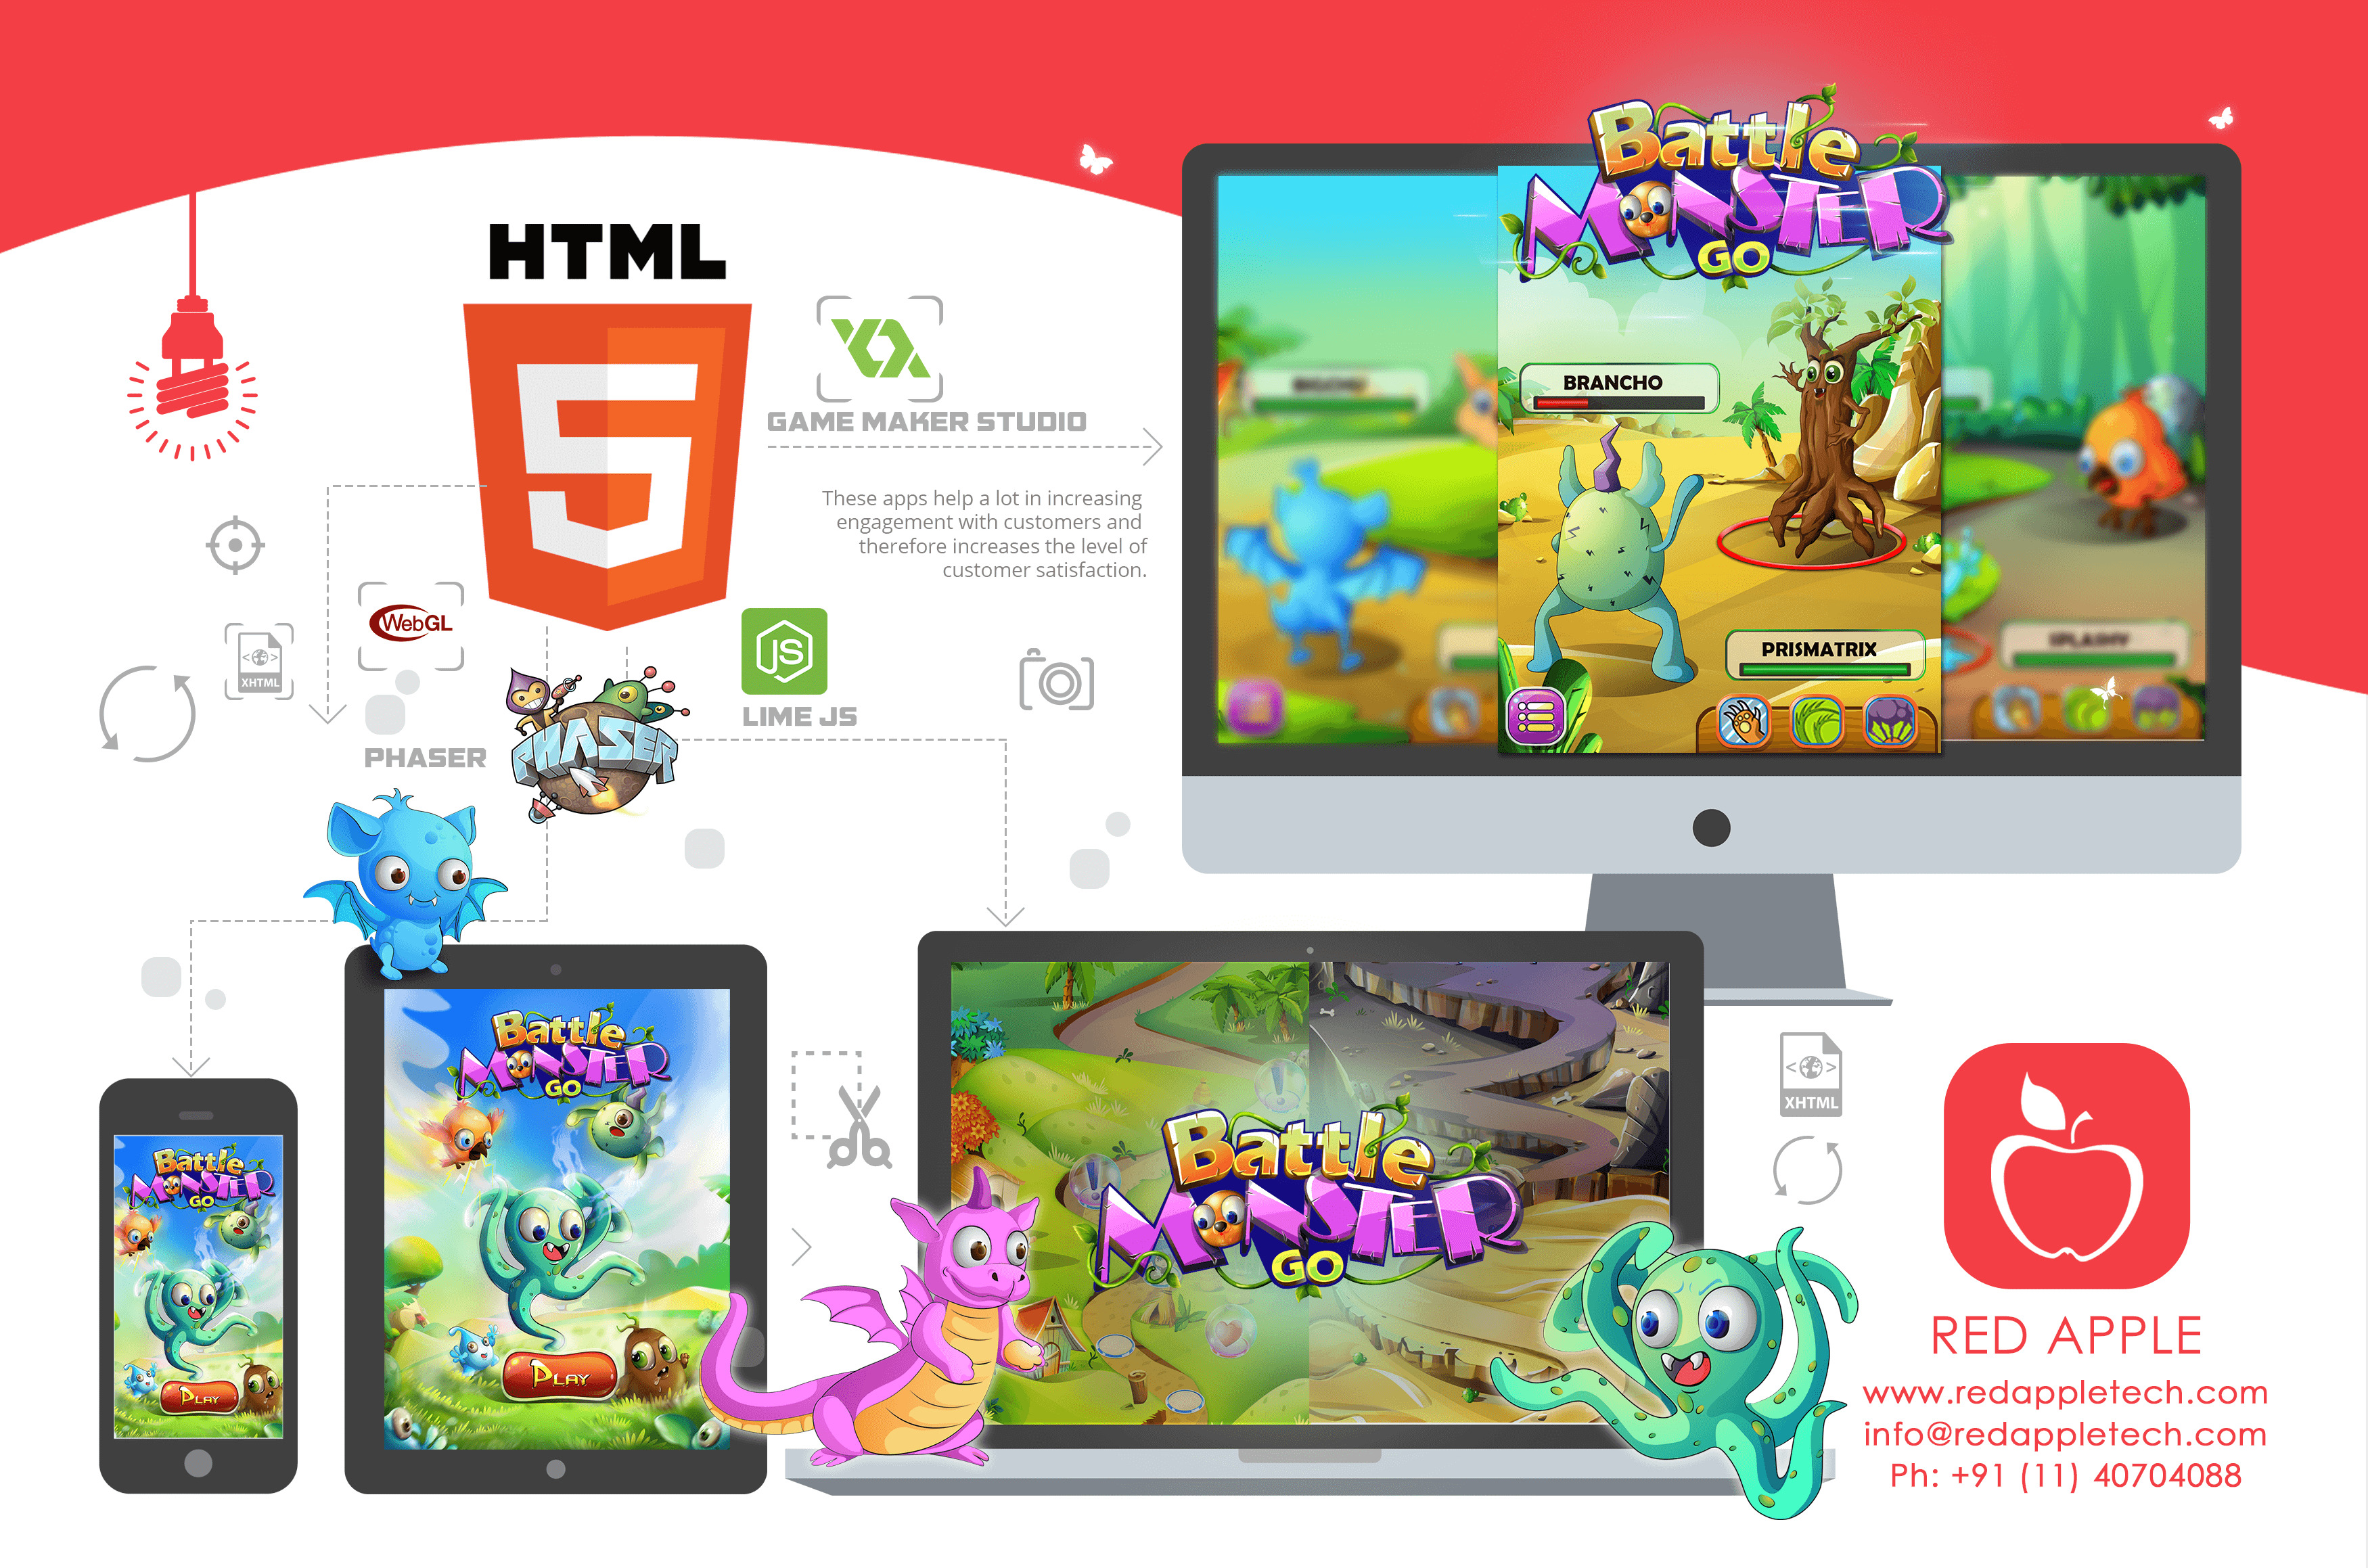 Top rated HTML5 games 